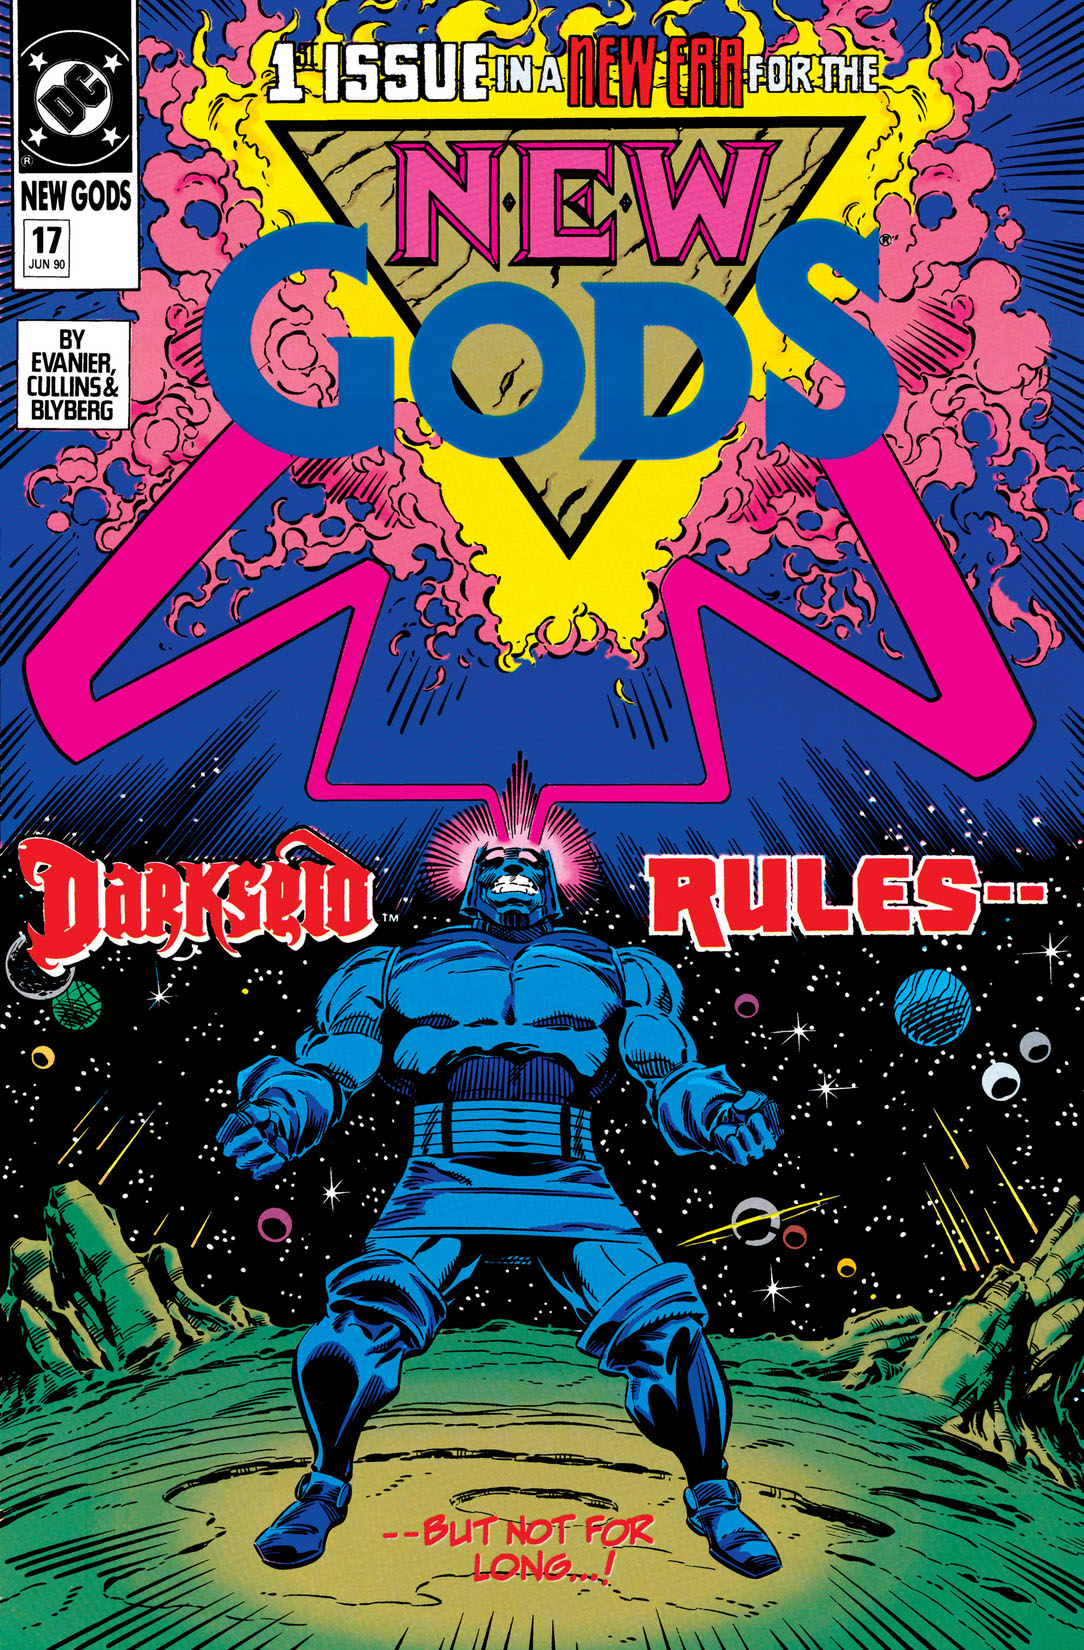 New Gods (1989-) #17 preview images